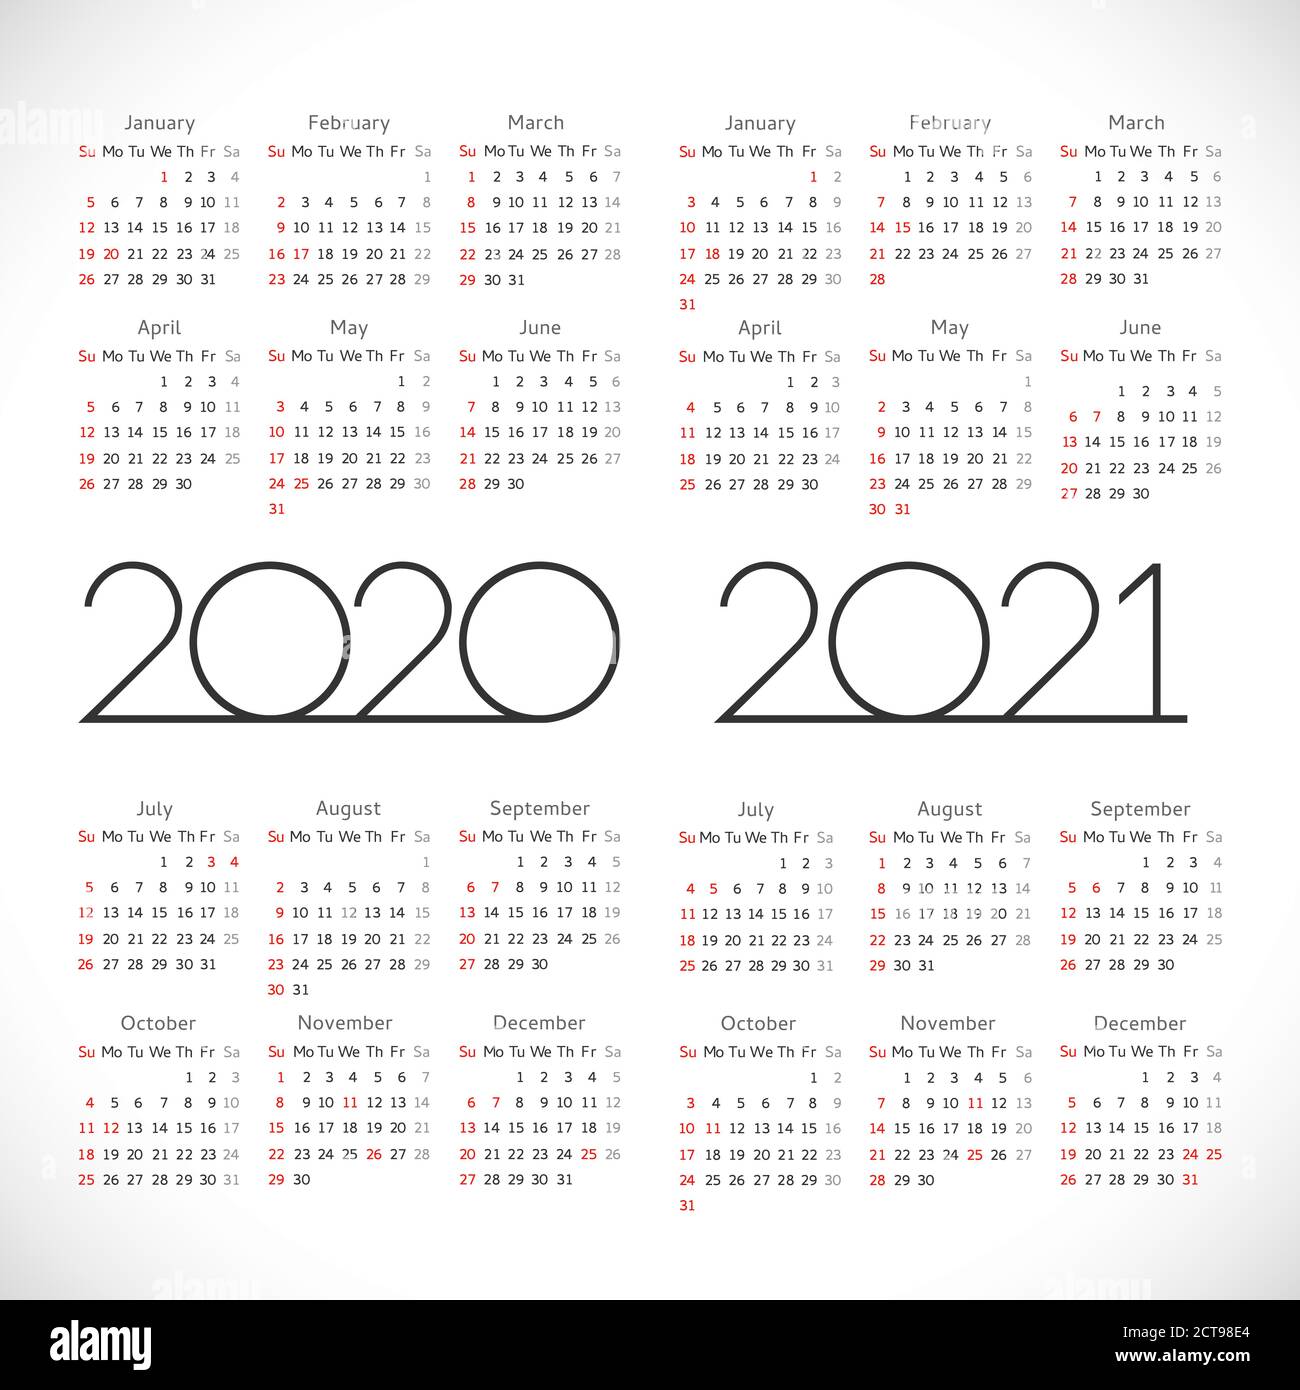 Calendar 2020 - 2021. Square schedule layout. Xmas logotype in minimalism style. Abstract isolated graphic design template. USA holidays. White color Stock Vector